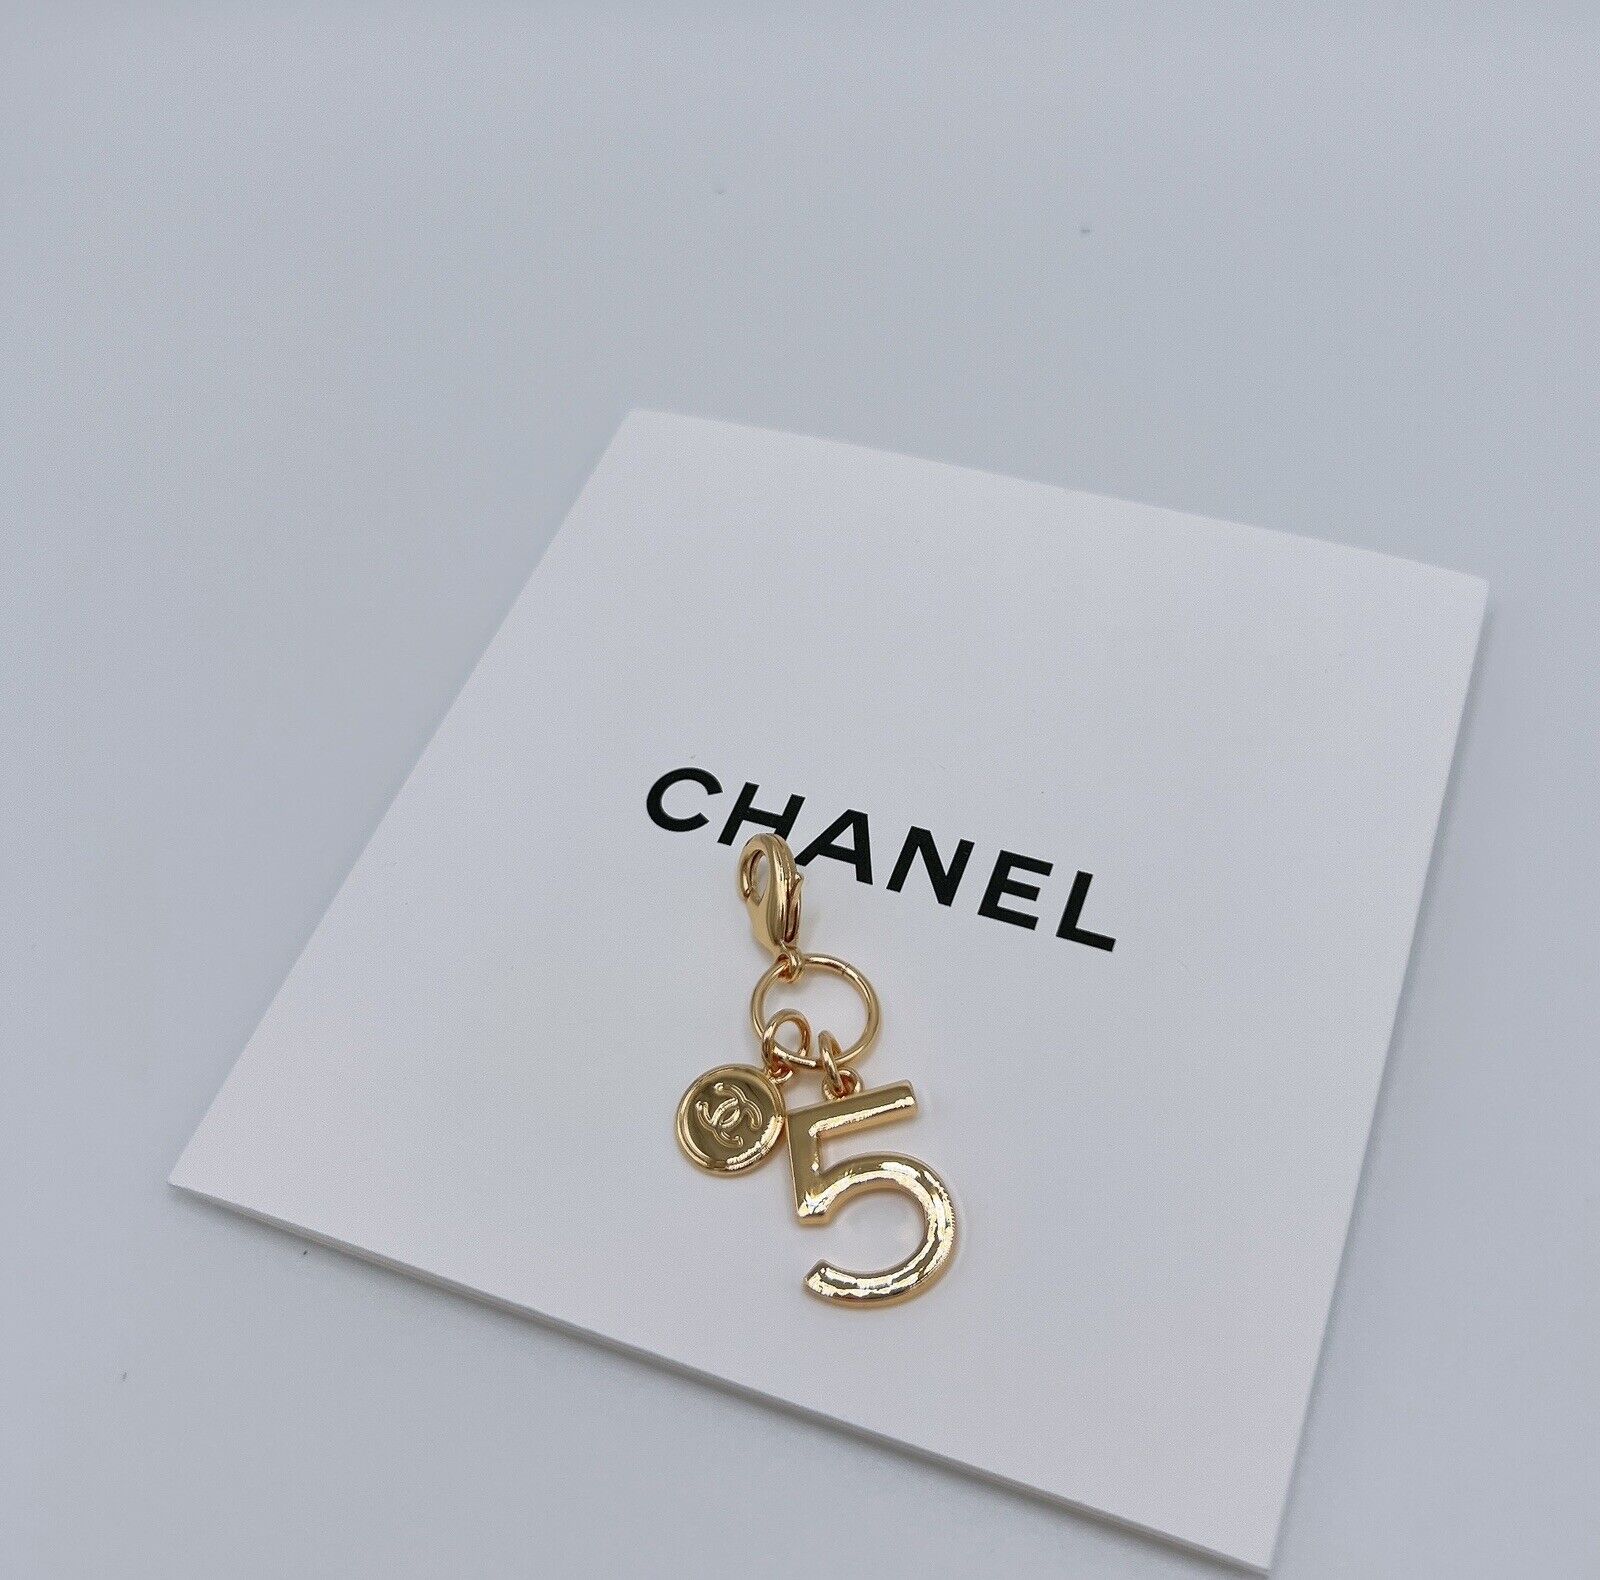 Chanel Gift Holiday Gold Charm No. 5